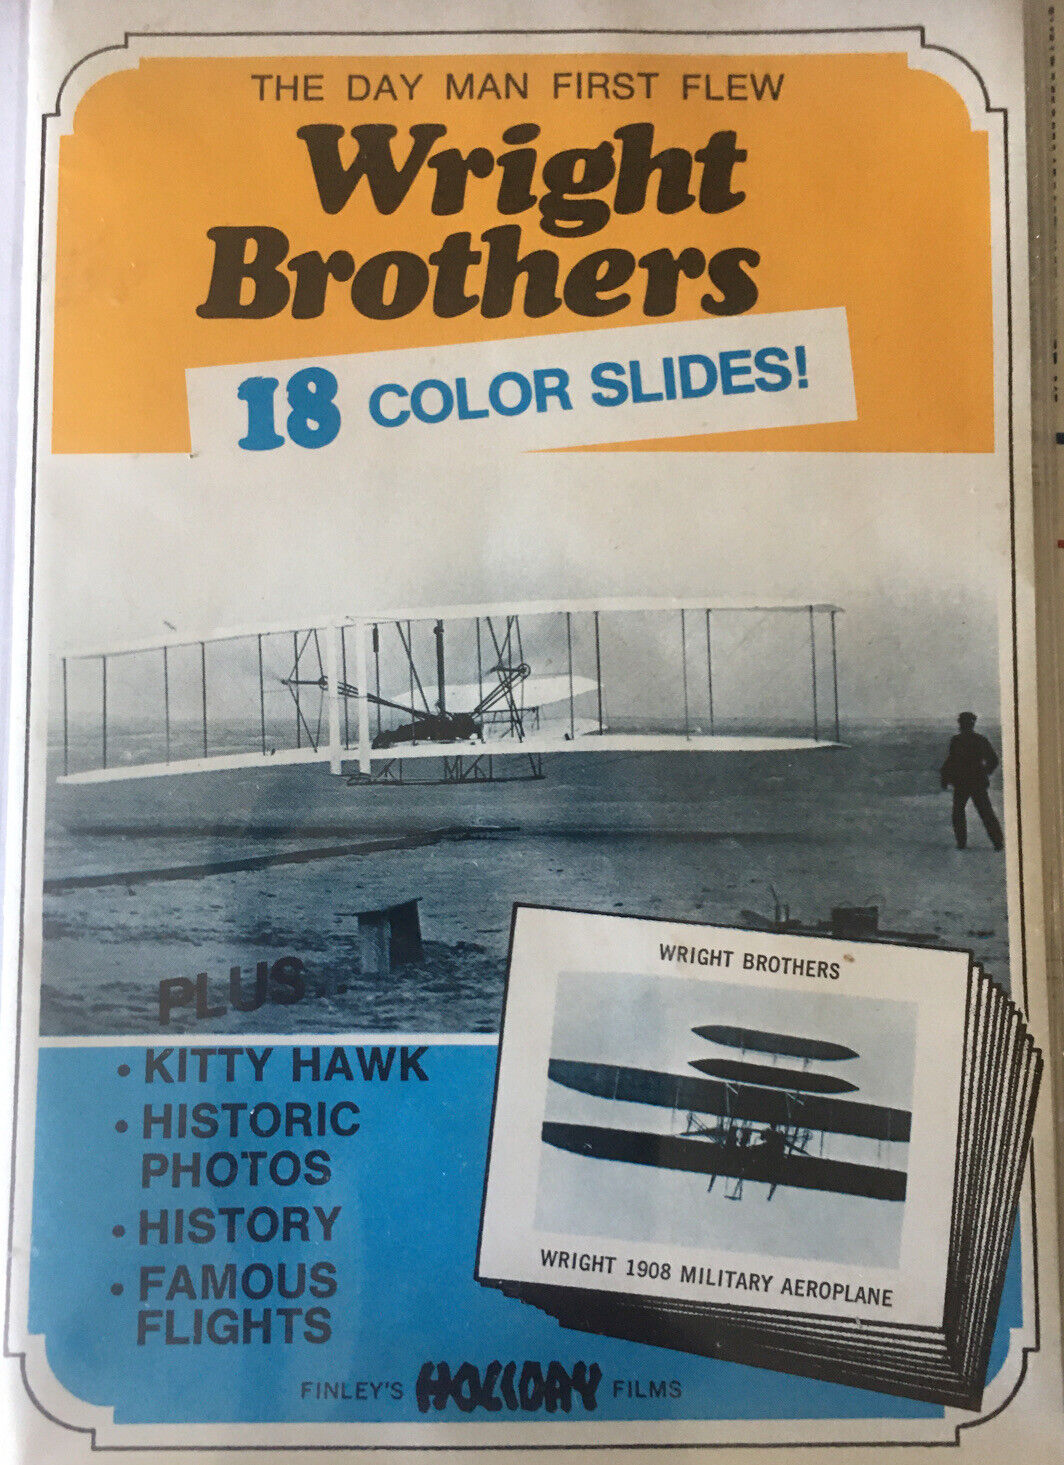 Wright Brothers “The Day Man First Flew” 18 Color Slides Finley’s Holiday Films